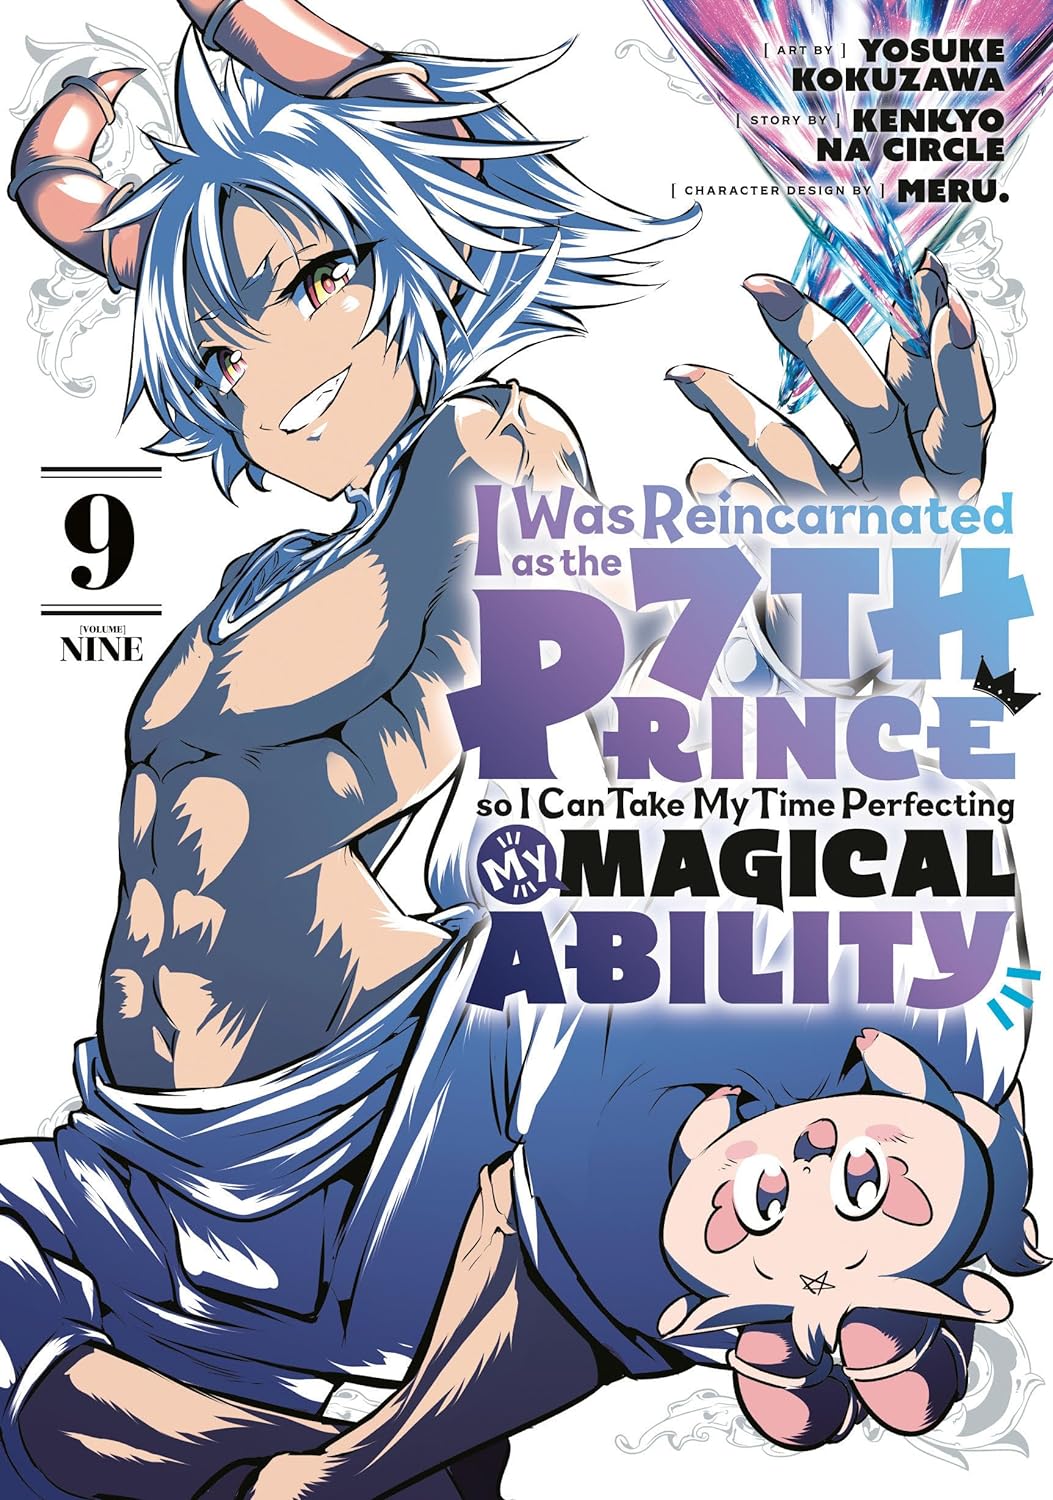 (19/12/2023) I Was Reincarnated as the 7th Prince so I Can Take My Time Perfecting My Magical Ability (Manga) Vol. 09